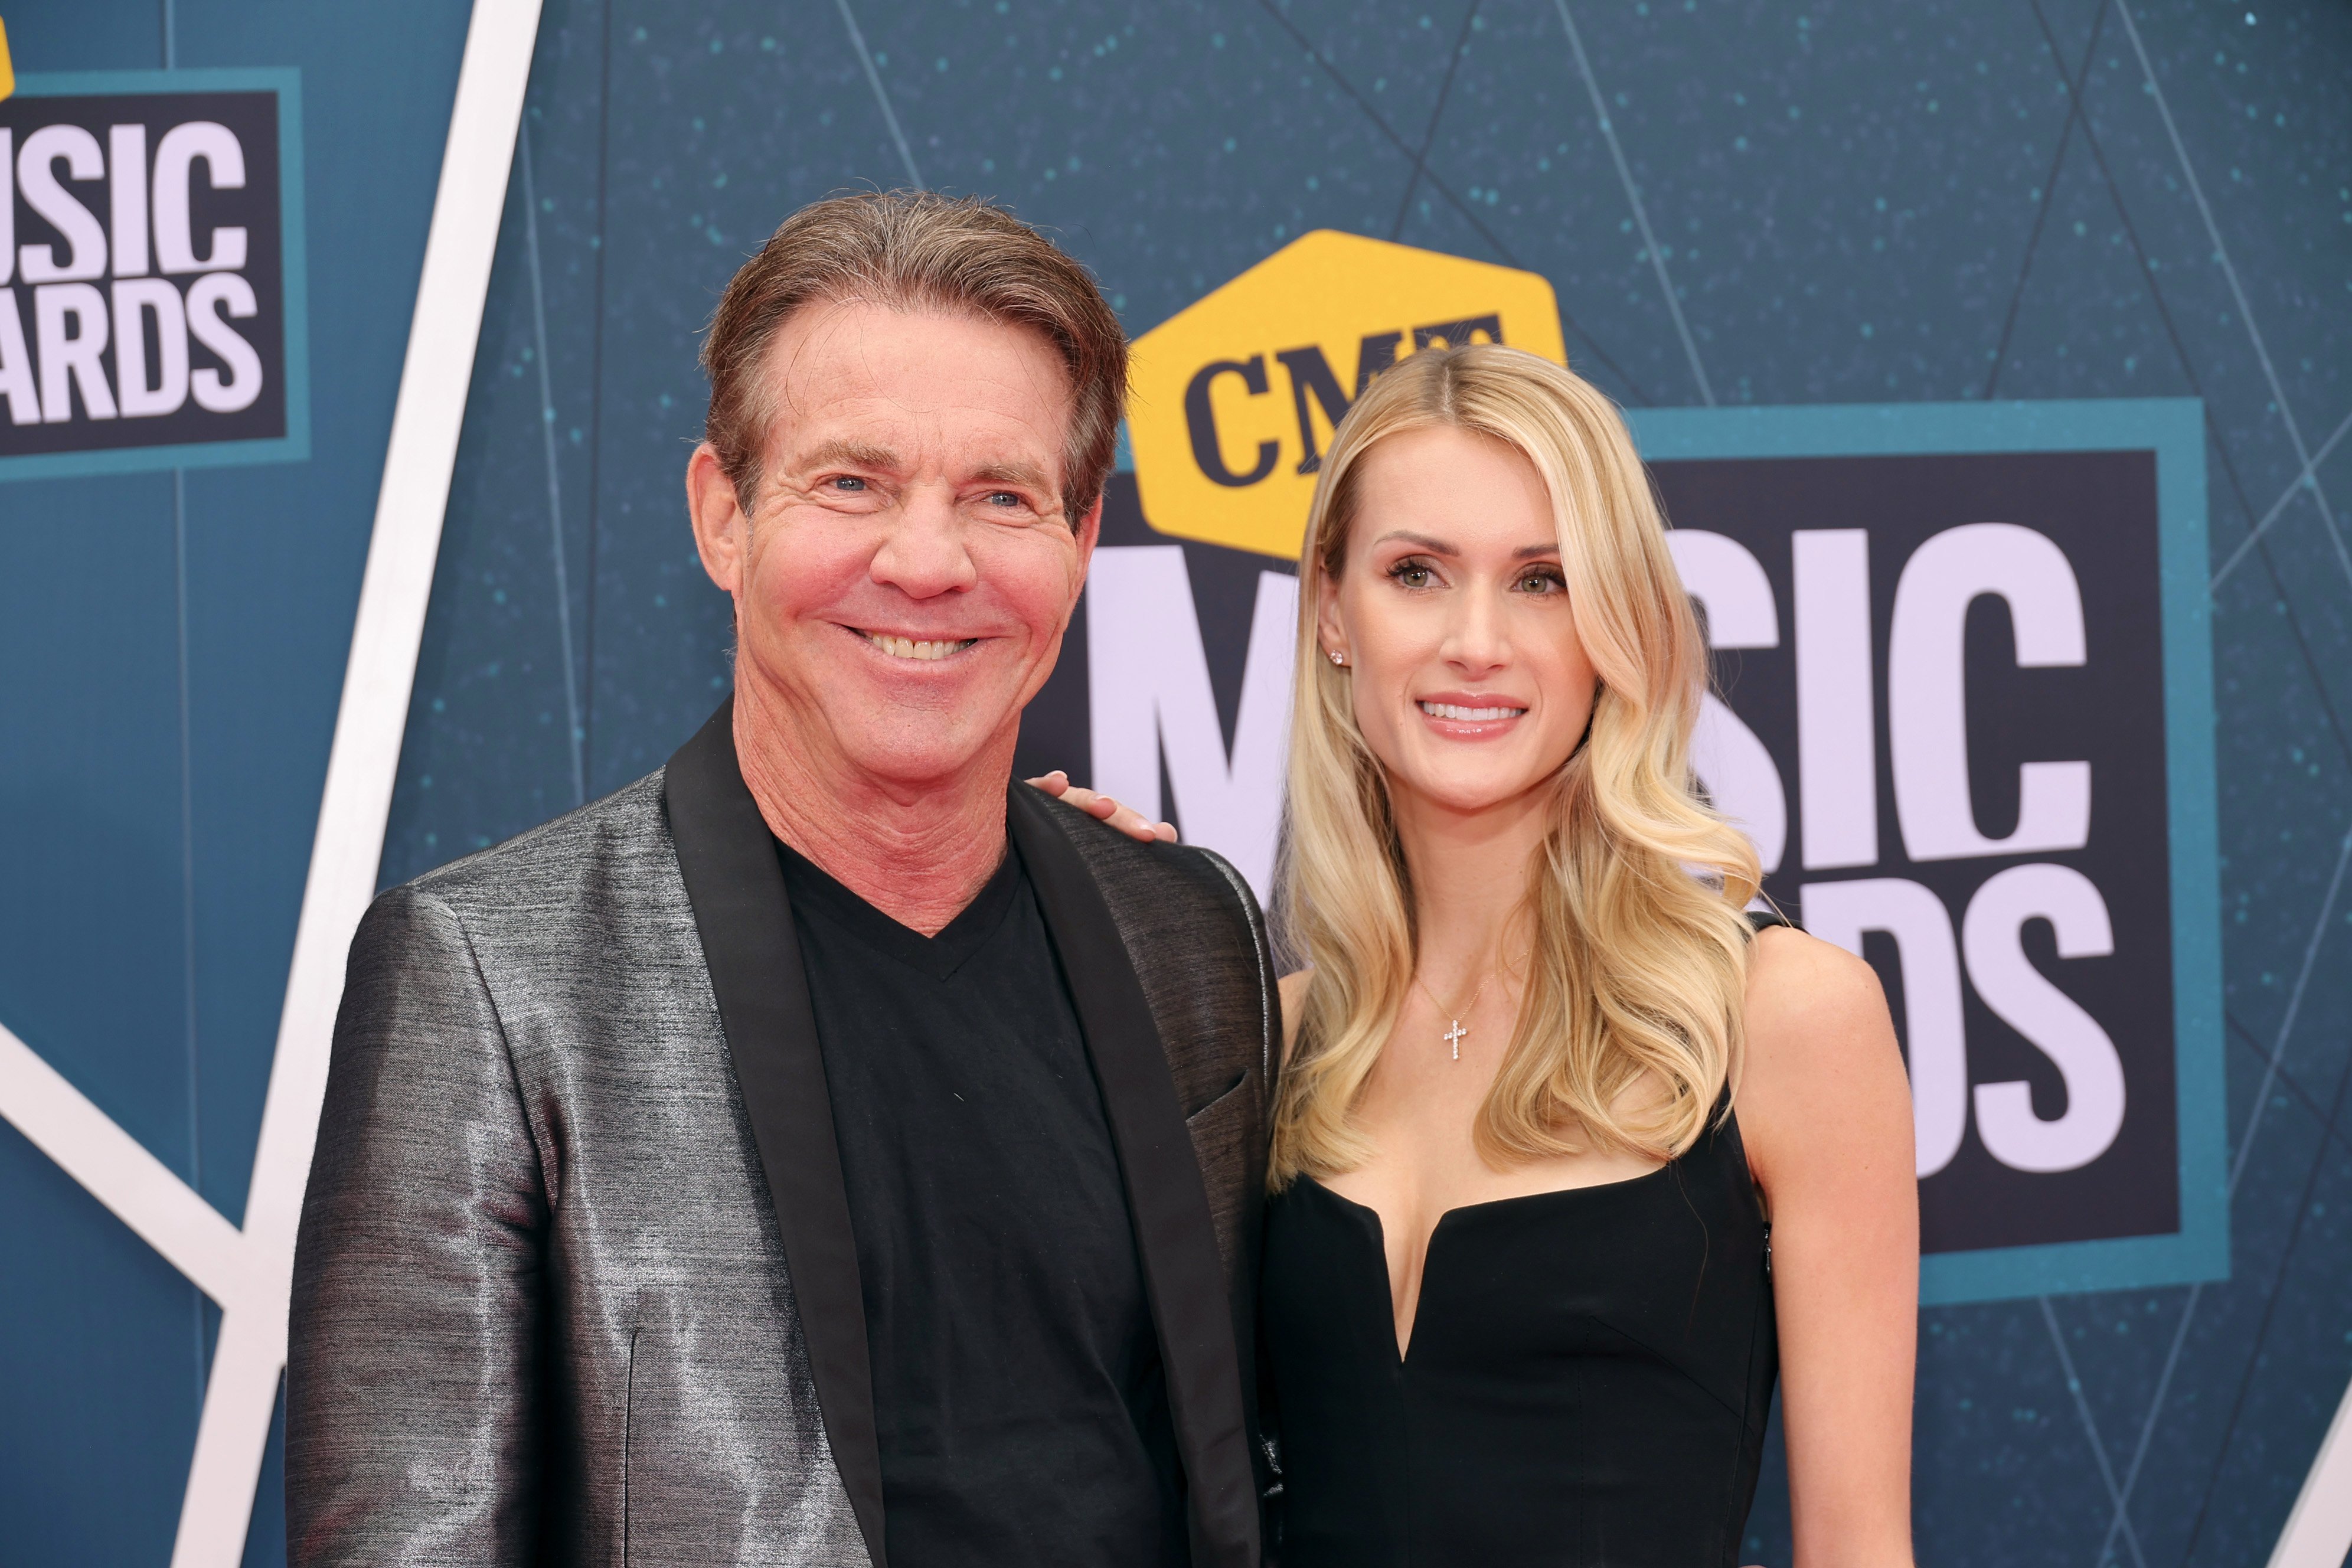 Dennis Quaid and Laura Savoie attend the 2022 CMT Music Awards at Nashville Municipal Auditorium on April 11, 2022 in Nashville, Tennessee. | Source: Getty Images